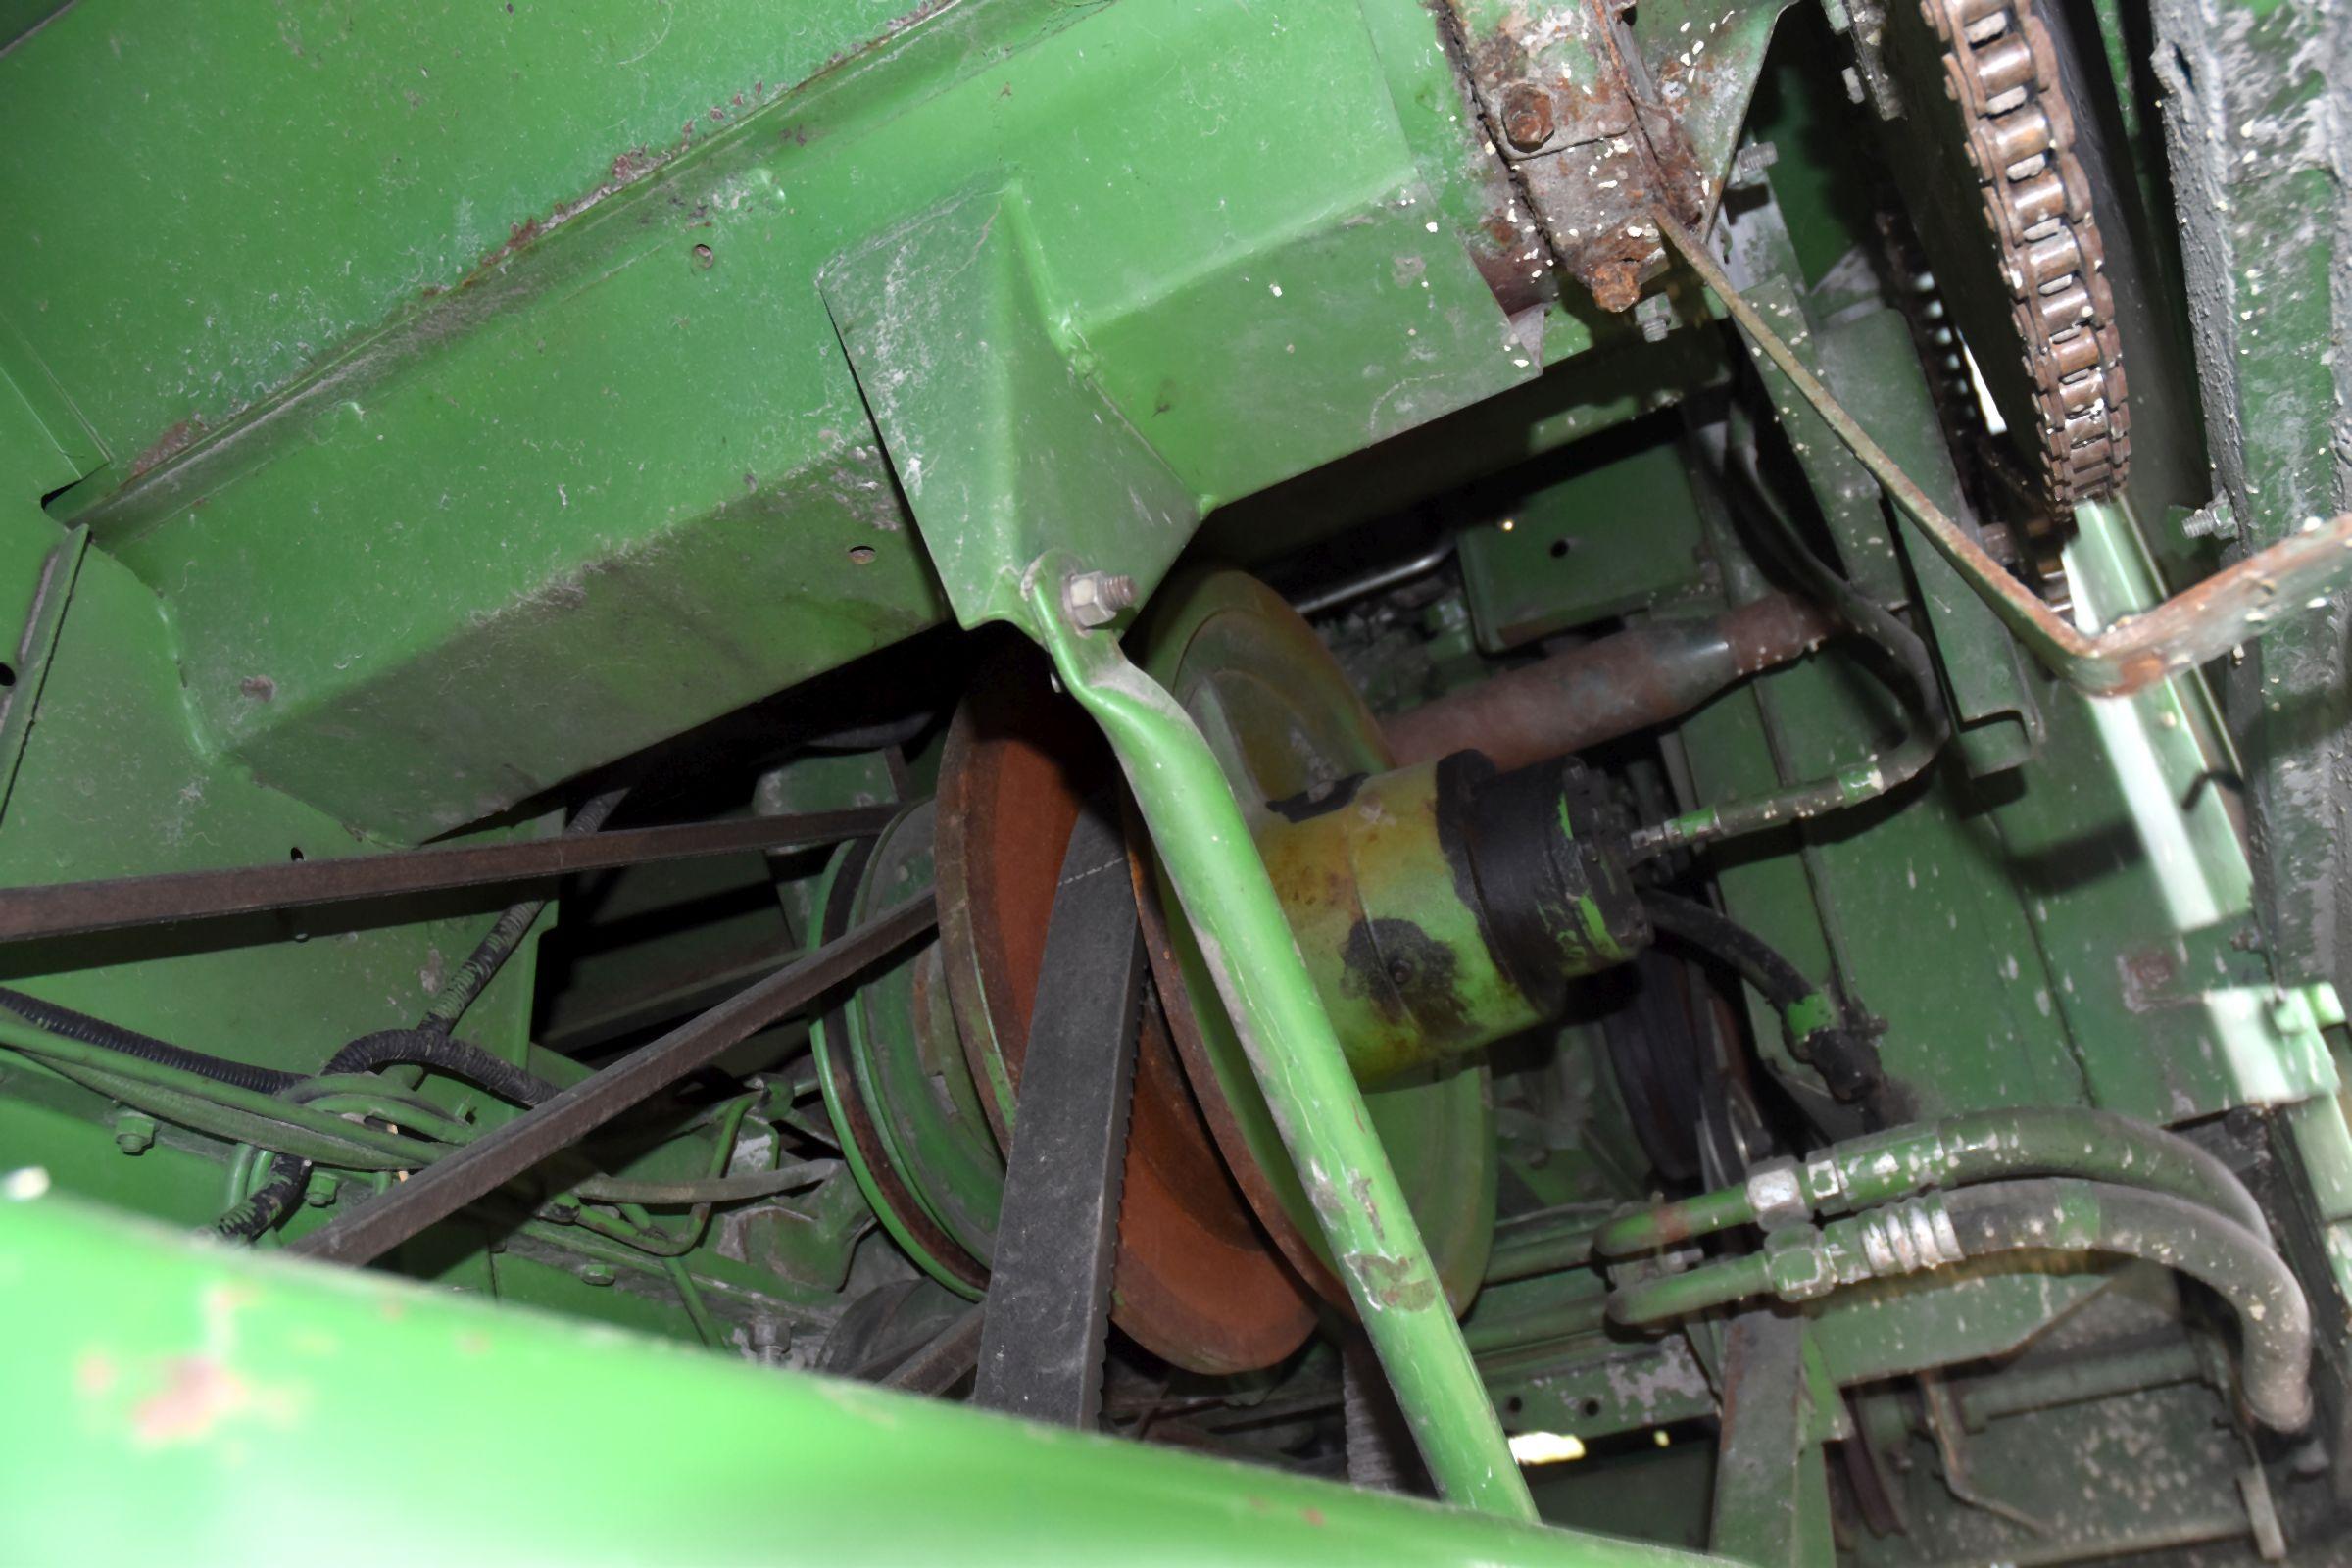 John Deere 6620 Turbo Diesel Combine, 24.5x32 Tires, Approx 3,439 Hours On Machine Tach Was Replaced